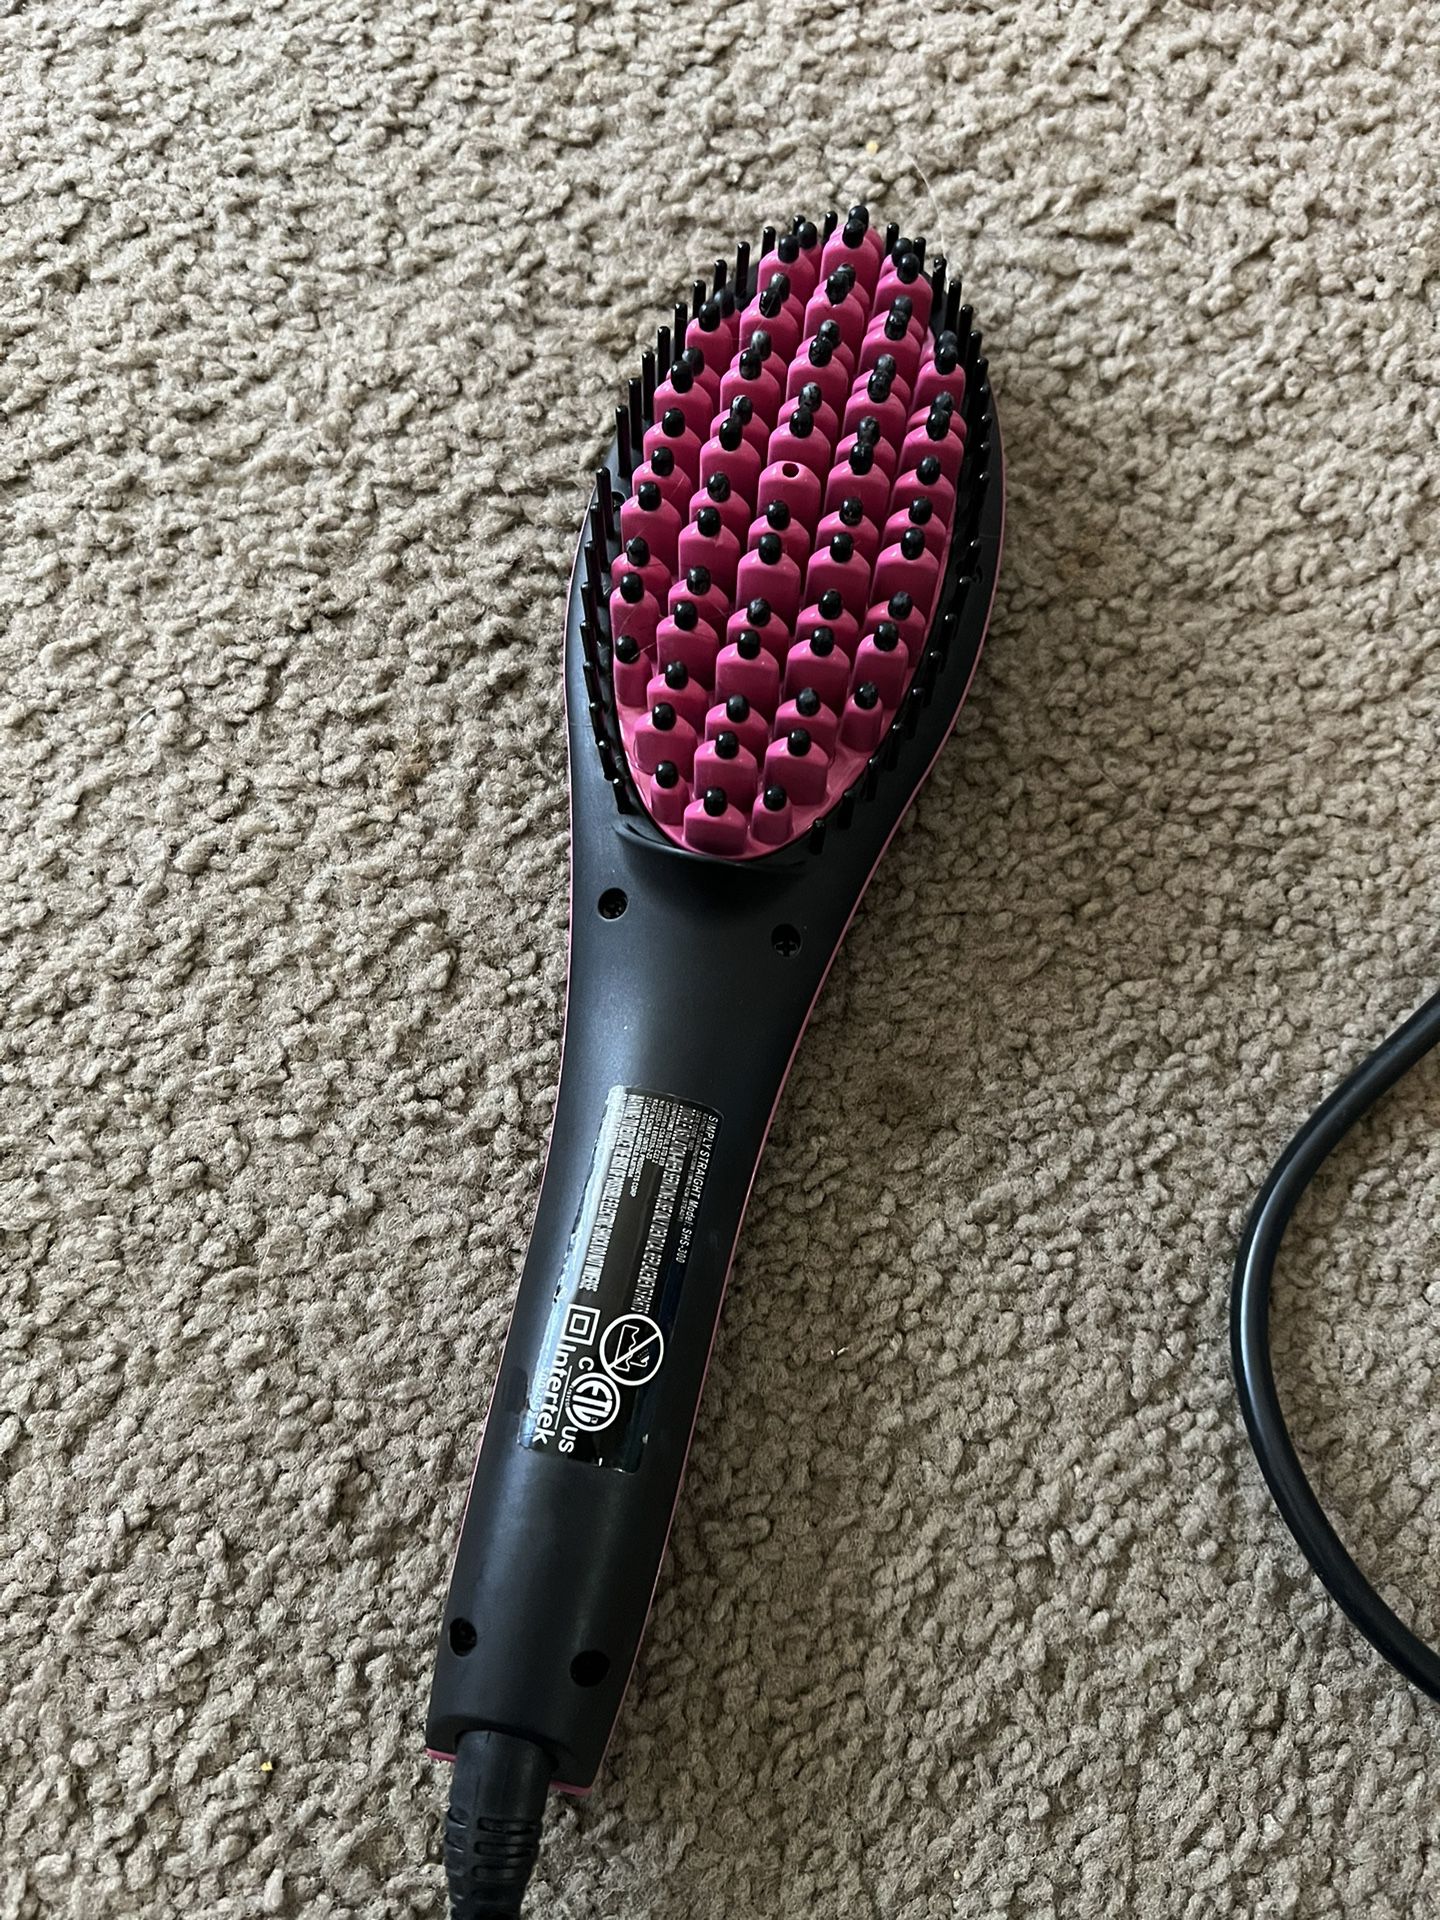 New! Simply Straight Hot Brush Full Size  Gets Hot Up To 450 Degrees 